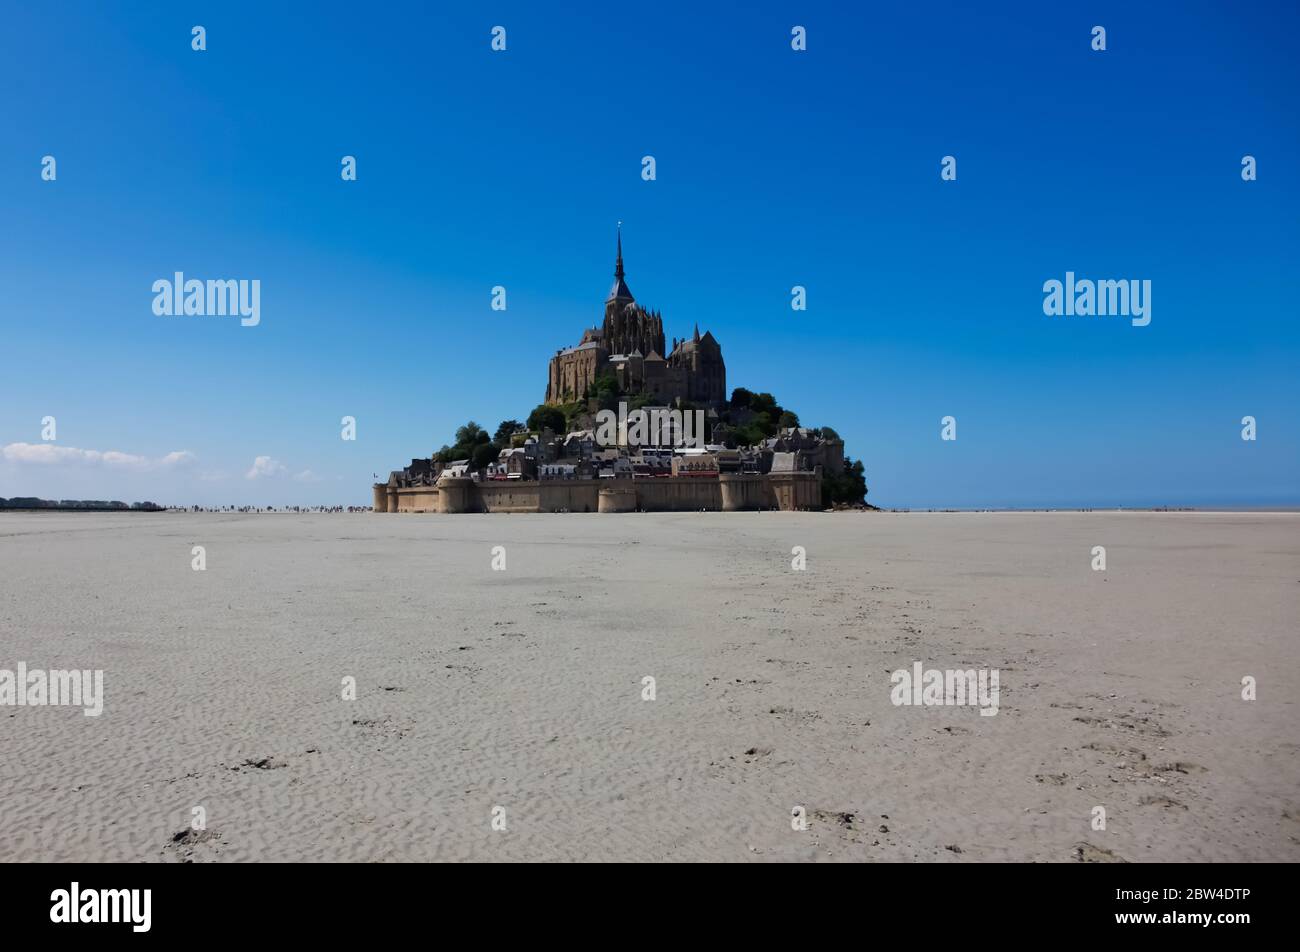 France, Normandy: Le Mont Saint Michel Monastery by day Stock Photo